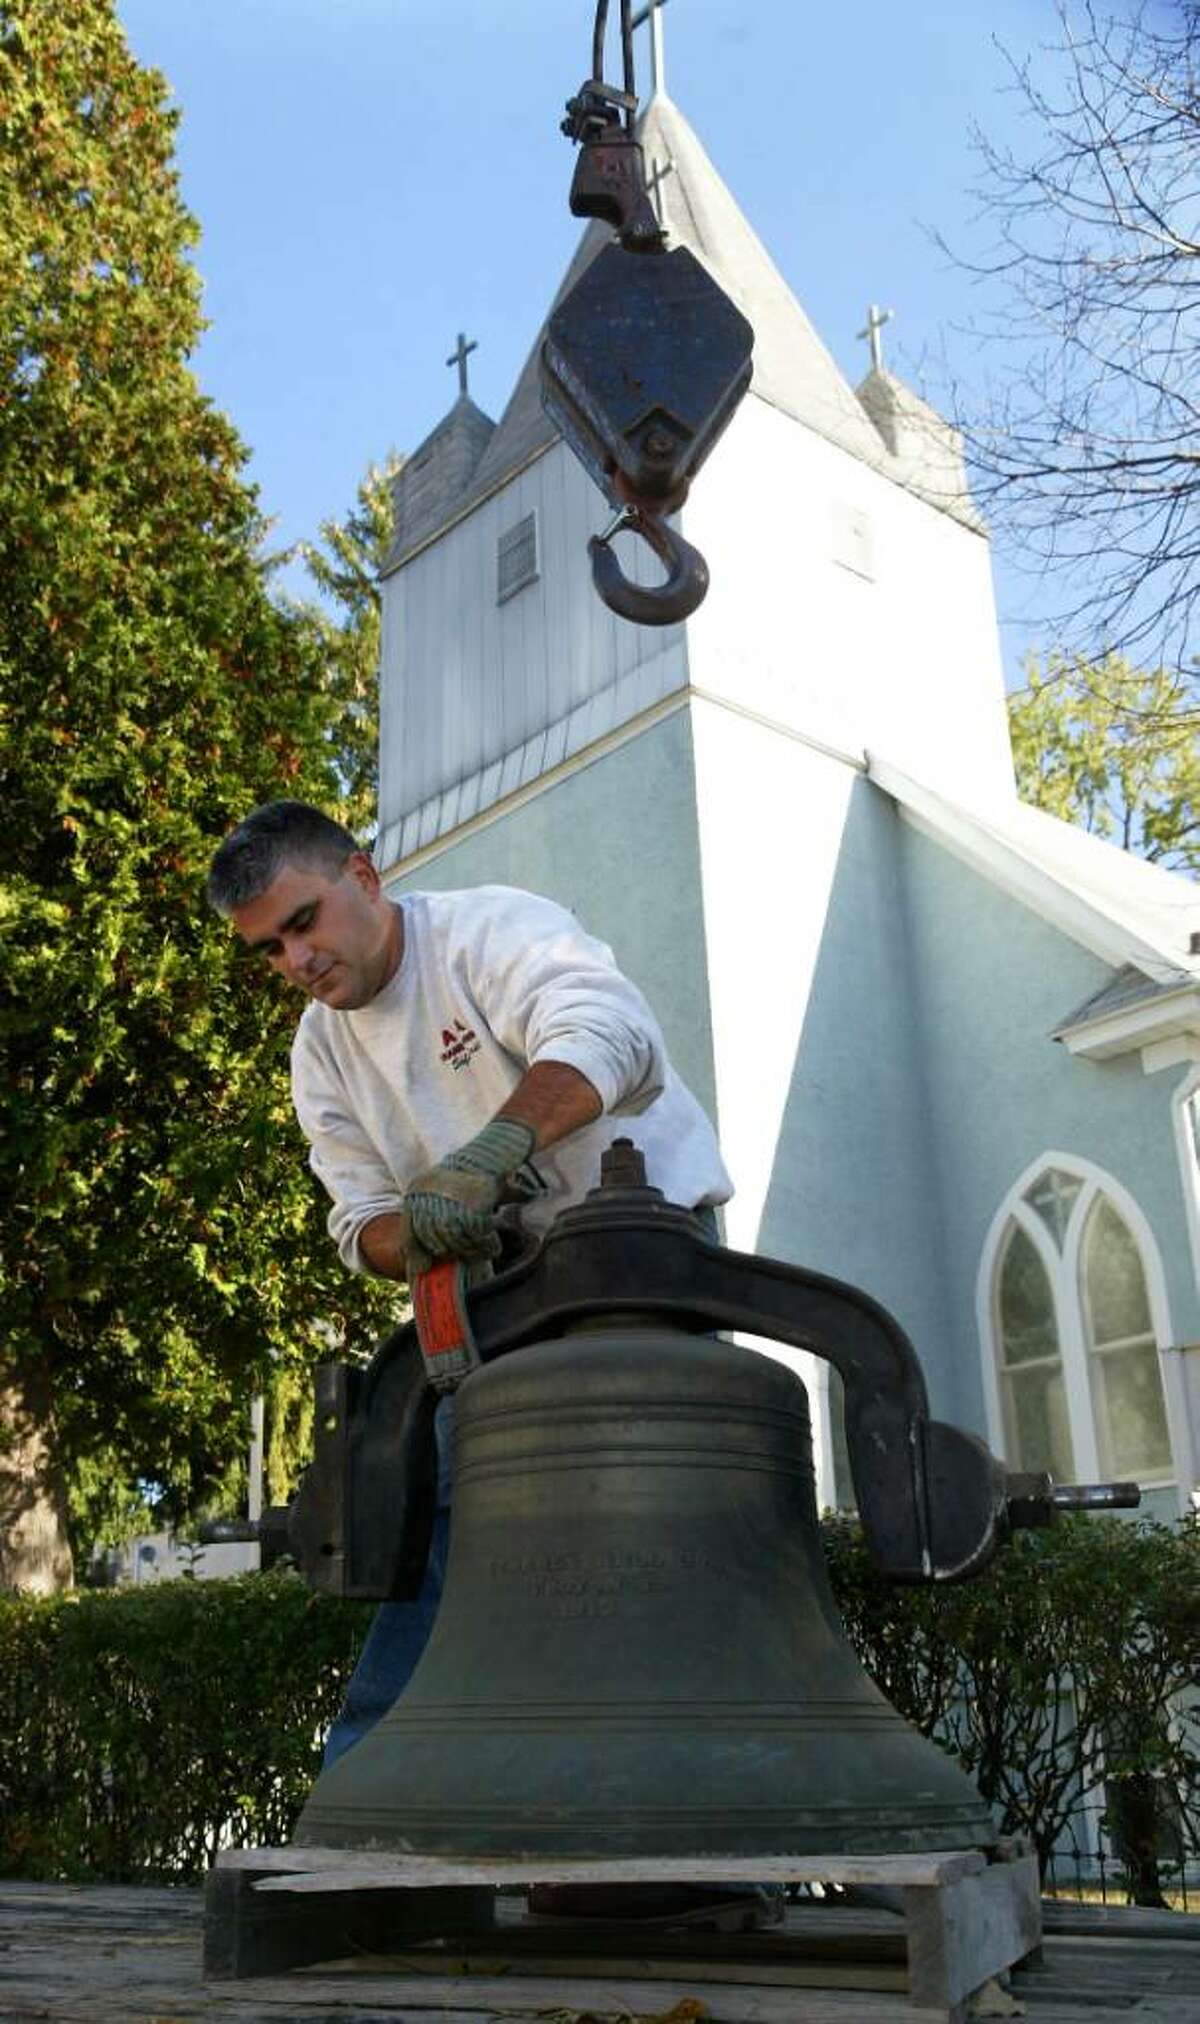 John Fernandes, of A & A Crane and Rigging in Bridgeport, unhooks the historic turn of the century church bell from his crane at Holy Trinity Greek Orthodox Church on Hubbell Avenue in Ansonia, Monday, Oct. 26, 2009.